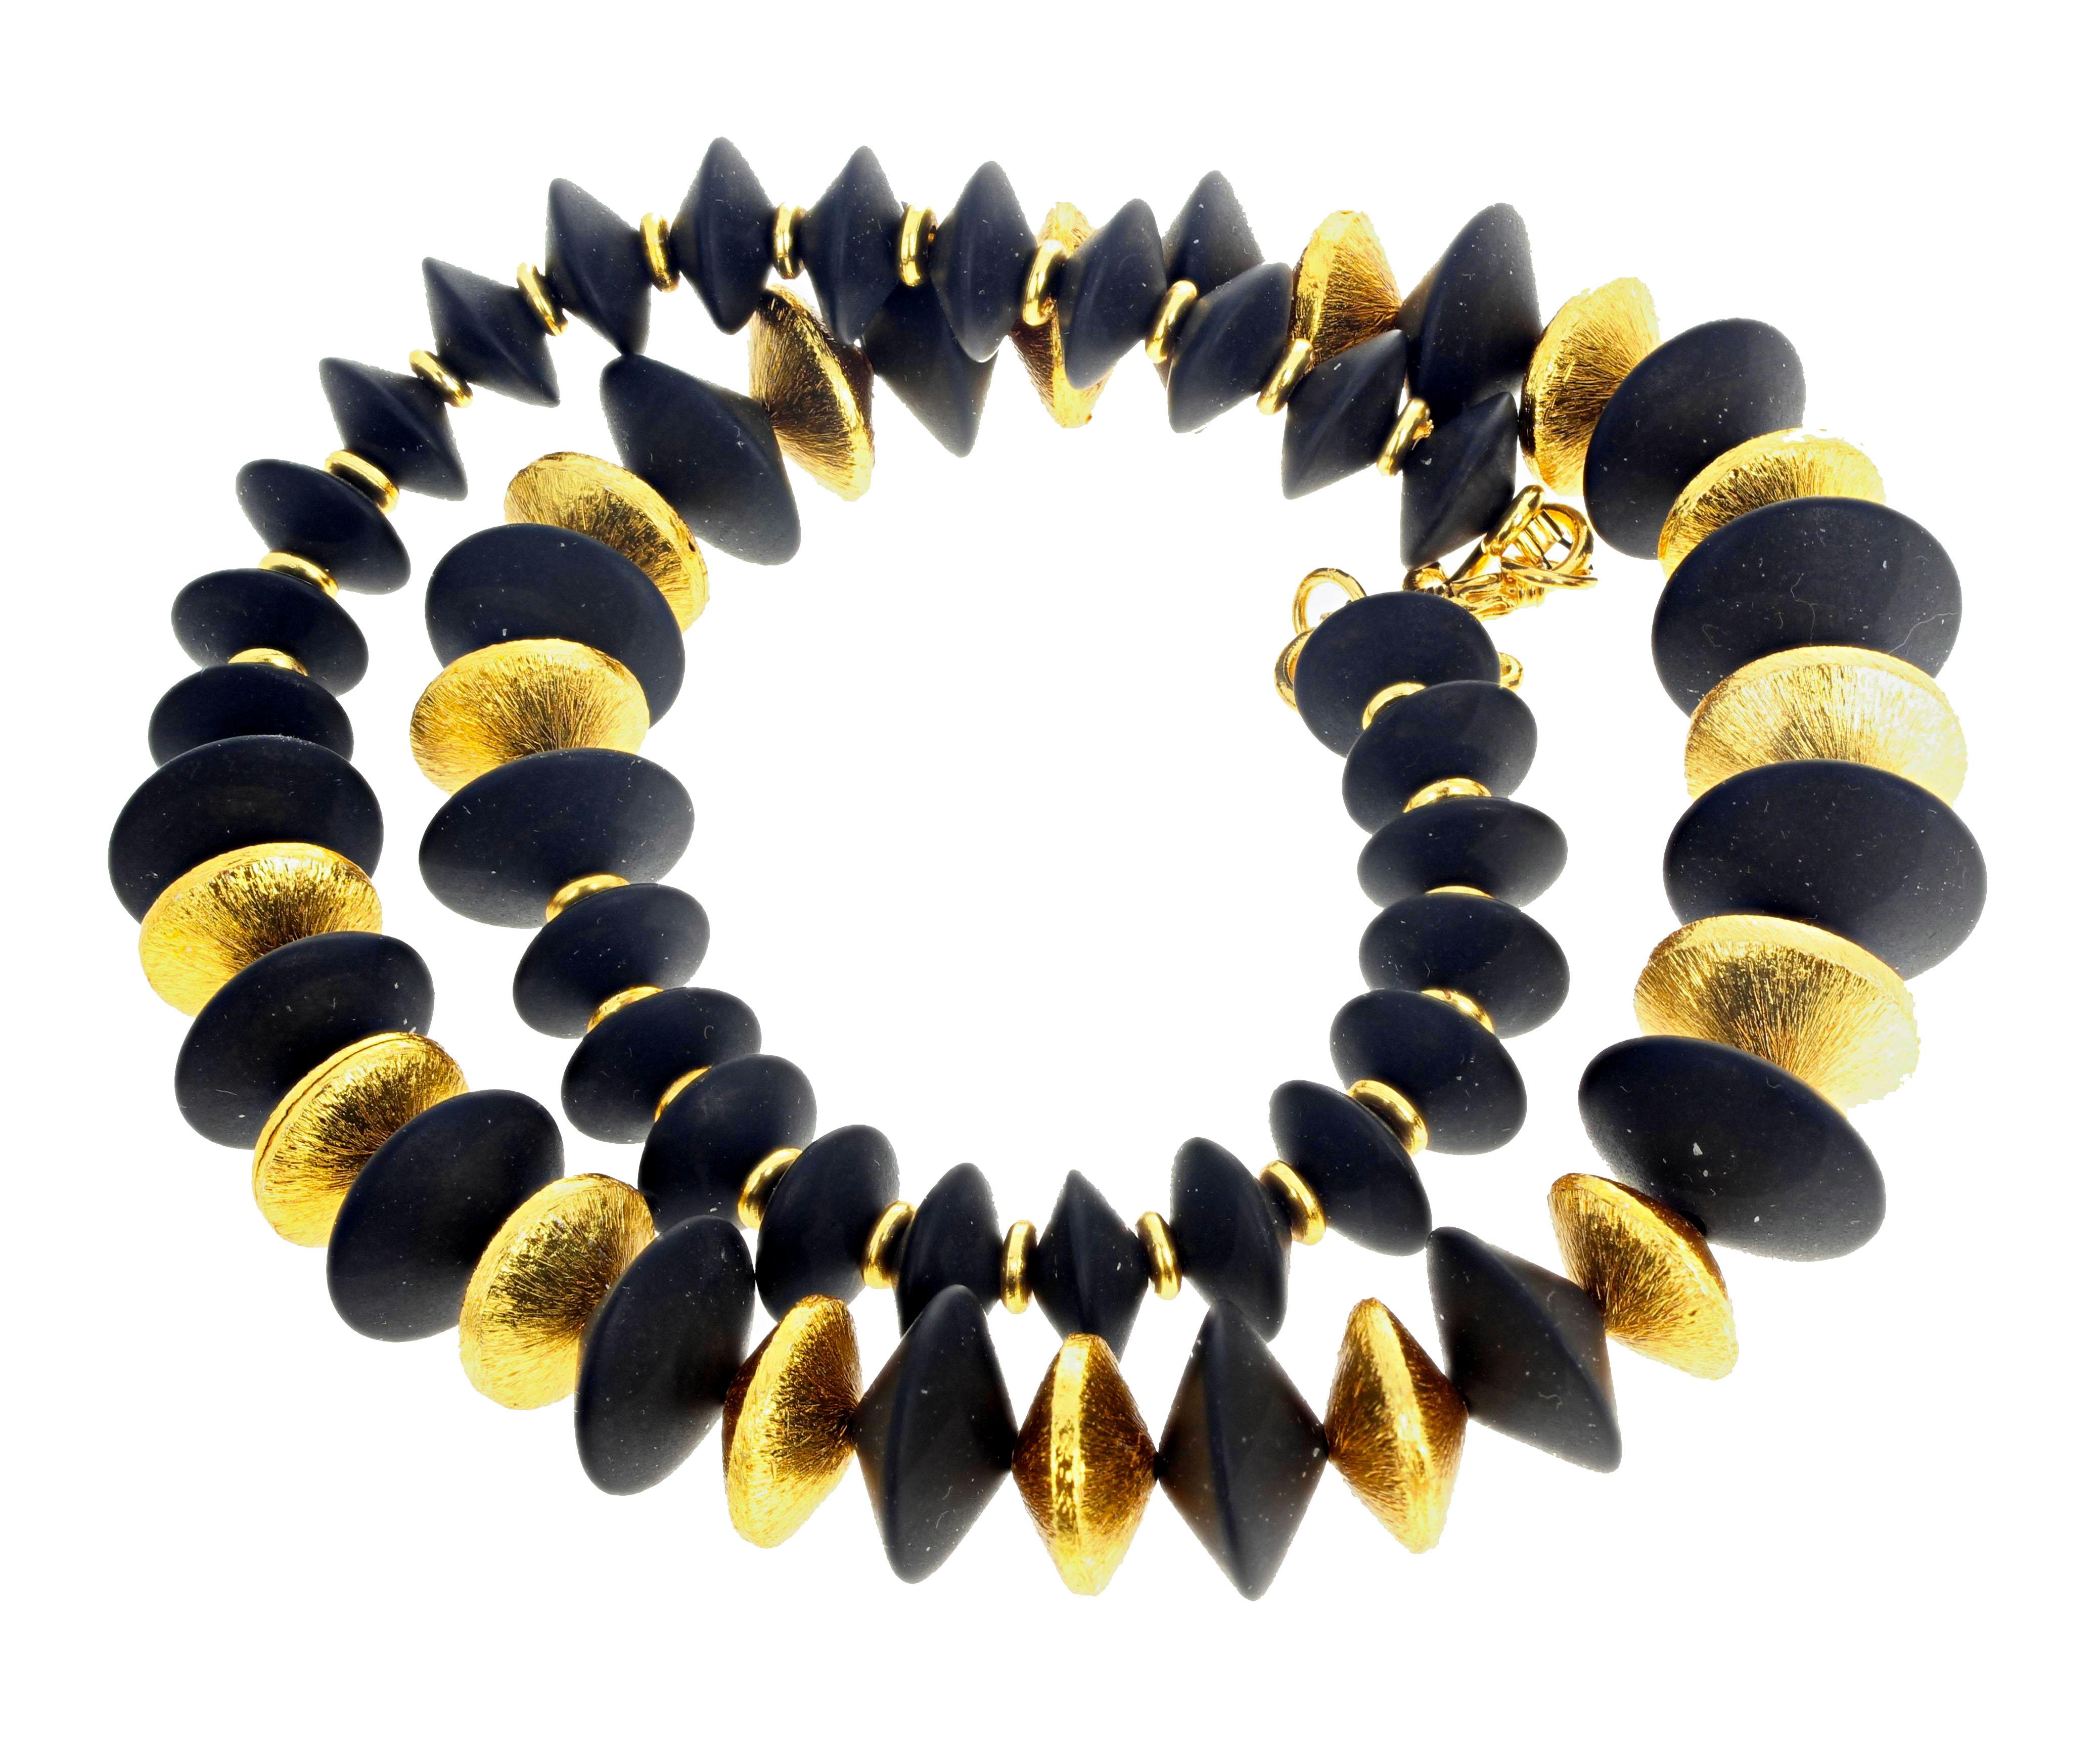 Beautifully cut and finished rondels of natural Black Onyx  enhanced with gold plated sterling silver rondels set in this elegant 20 inch long necklace.  The largest gemstone rondels are approximately 20 mm.  The clasp is an easy to use vermeil